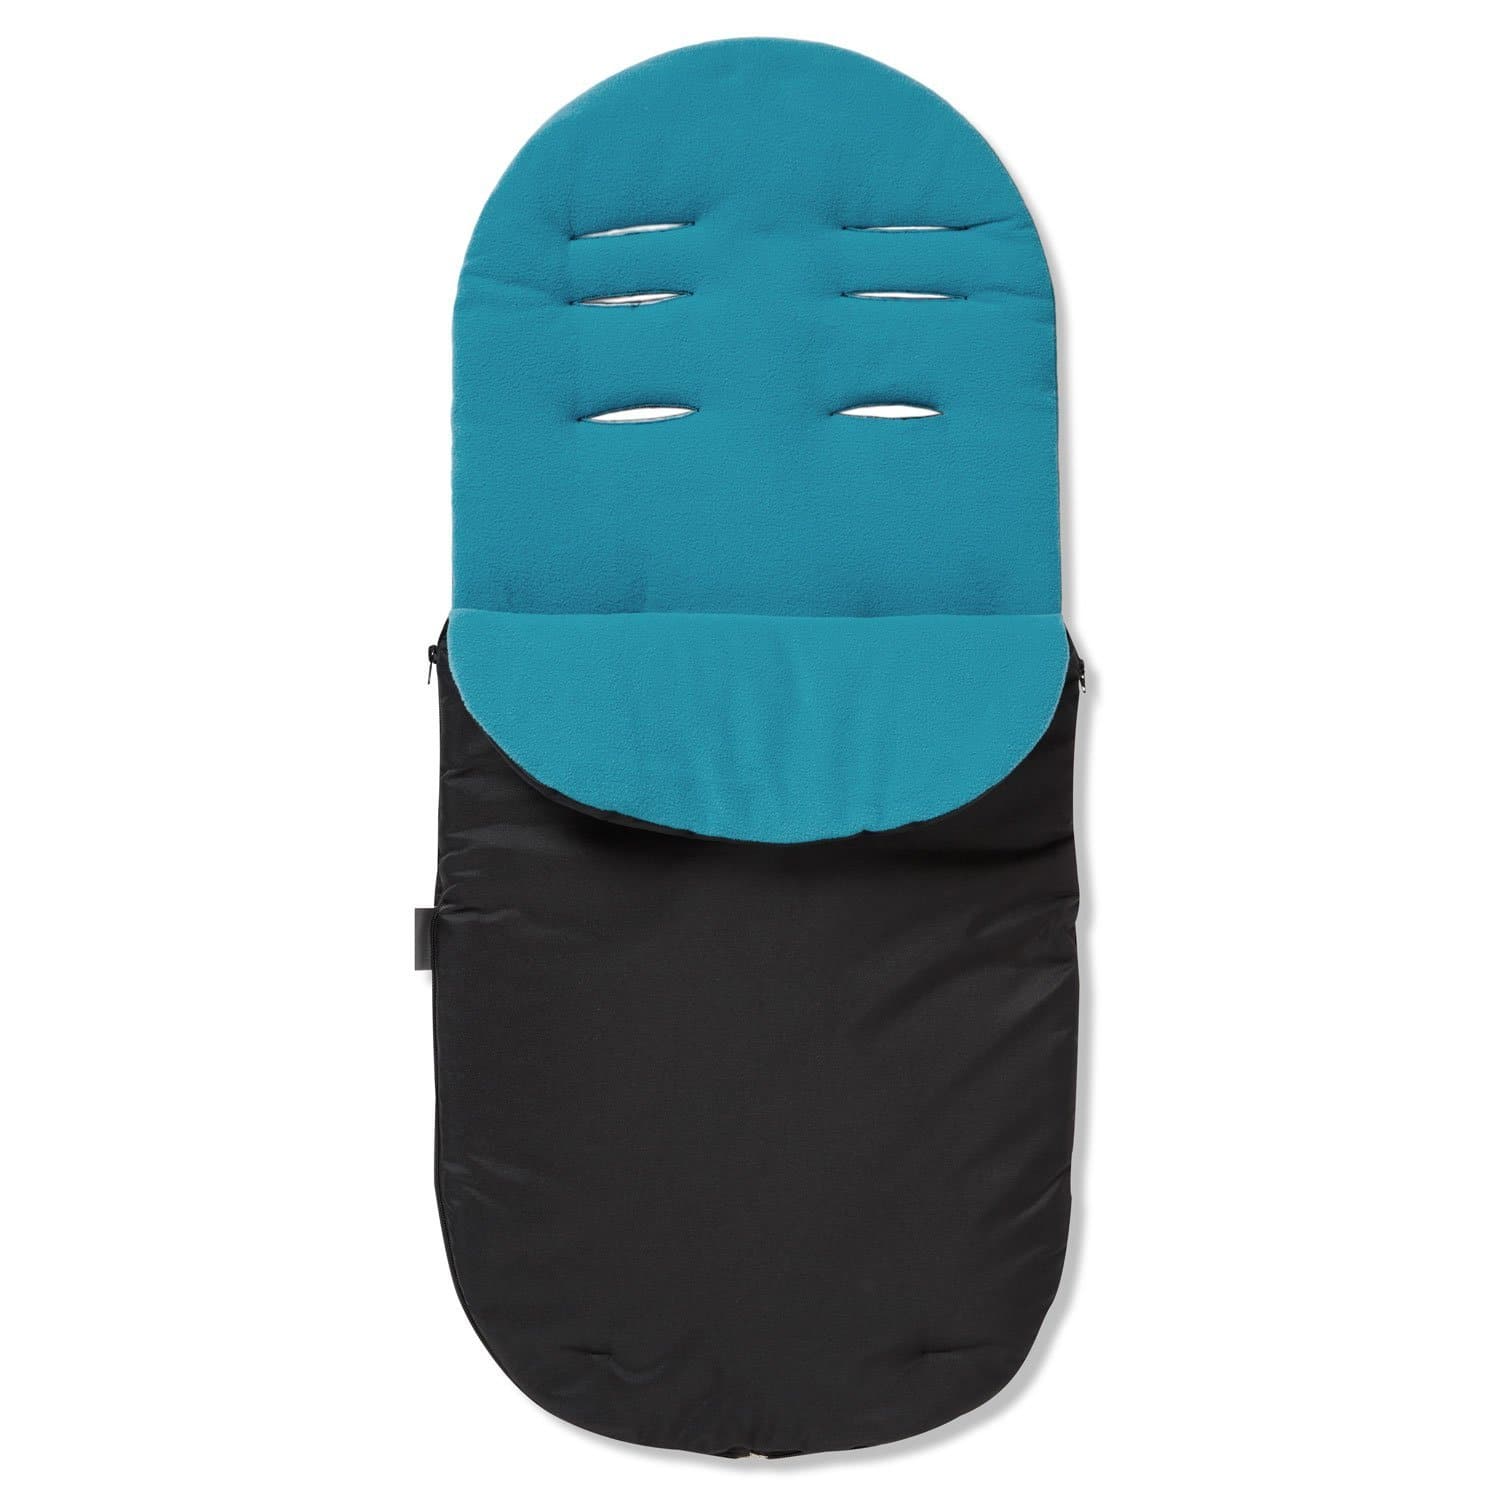 Footmuff / Cosy Toes Compatible with Chicco - Turquoise / Fits All Models | For Your Little One